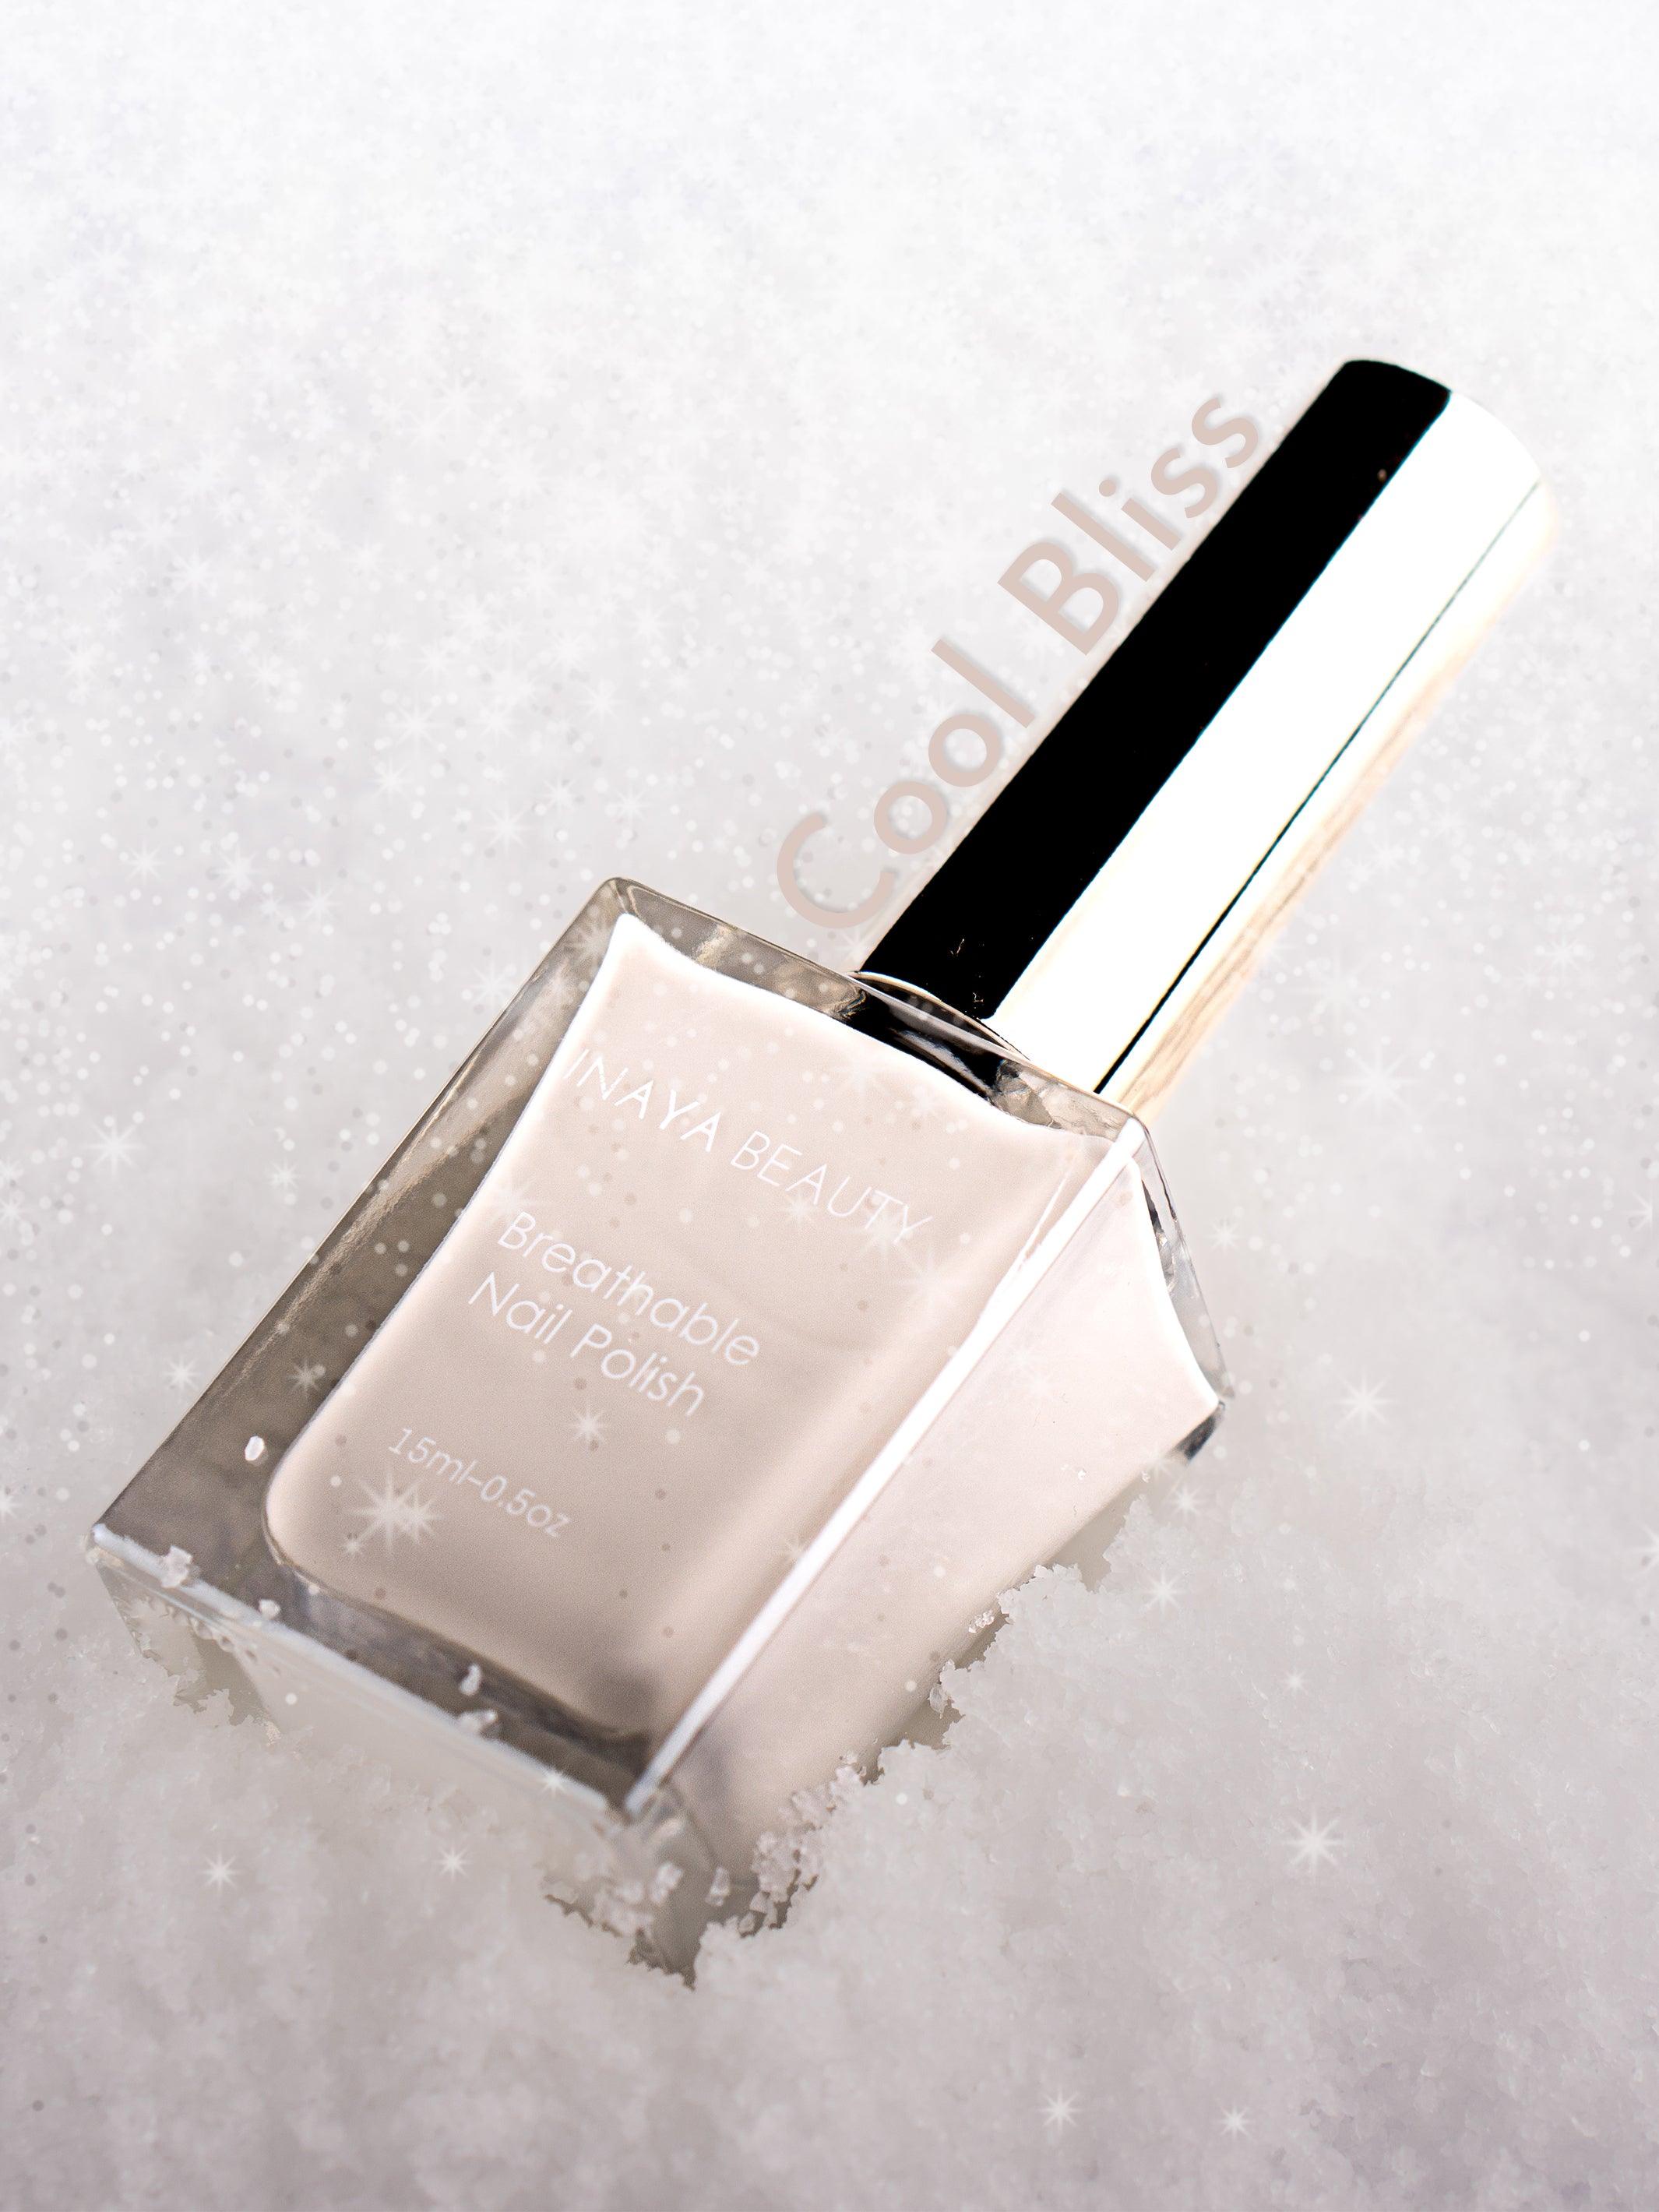 Winter Nail Care using our Breathable Nail Polish - Inaya Beauty Breathable Nail Polish